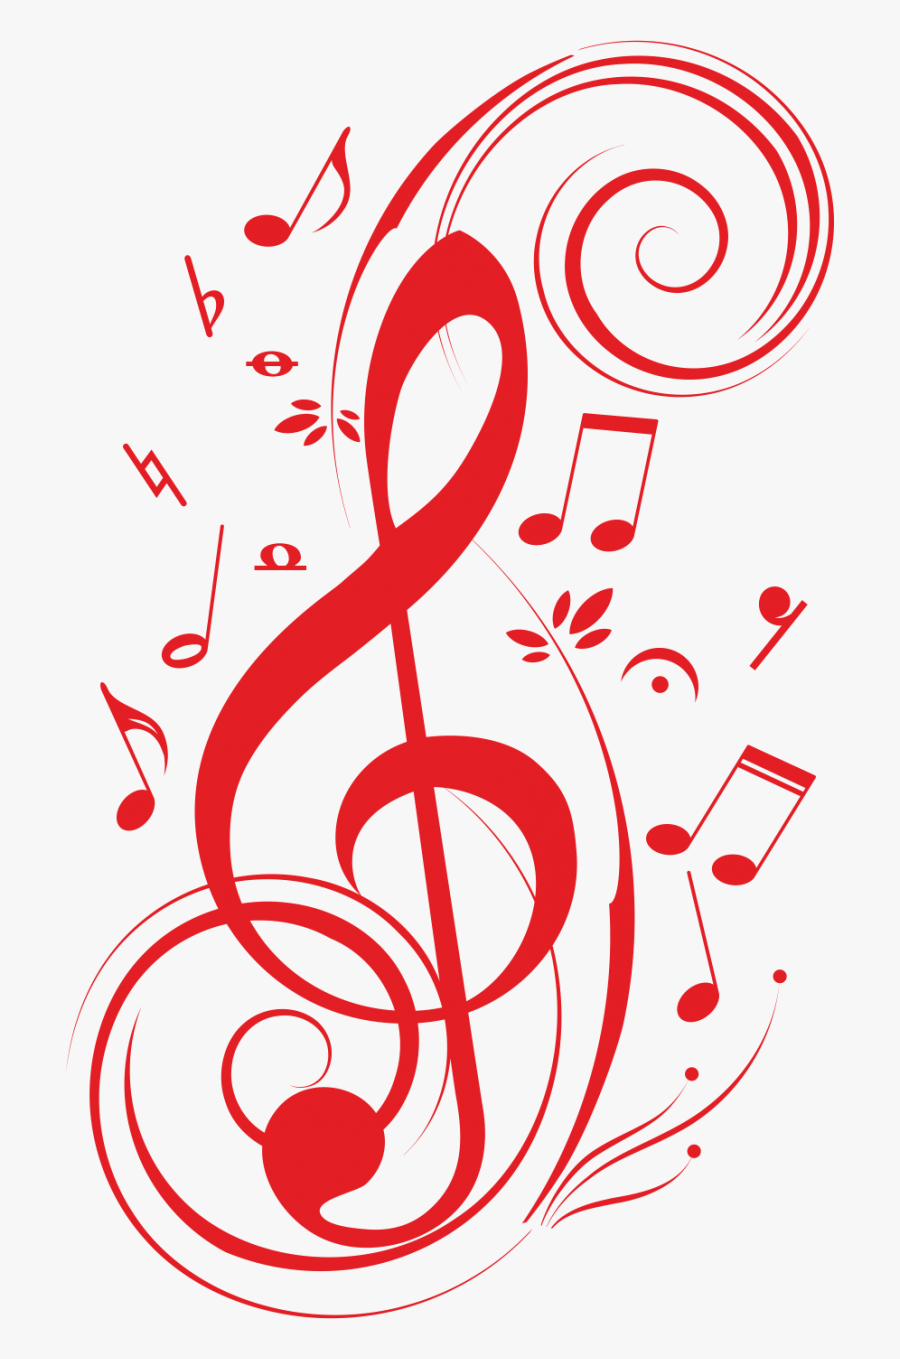 Musical Note Clef Clip Art - Music Symbols Images Free Download, Transparent Clipart